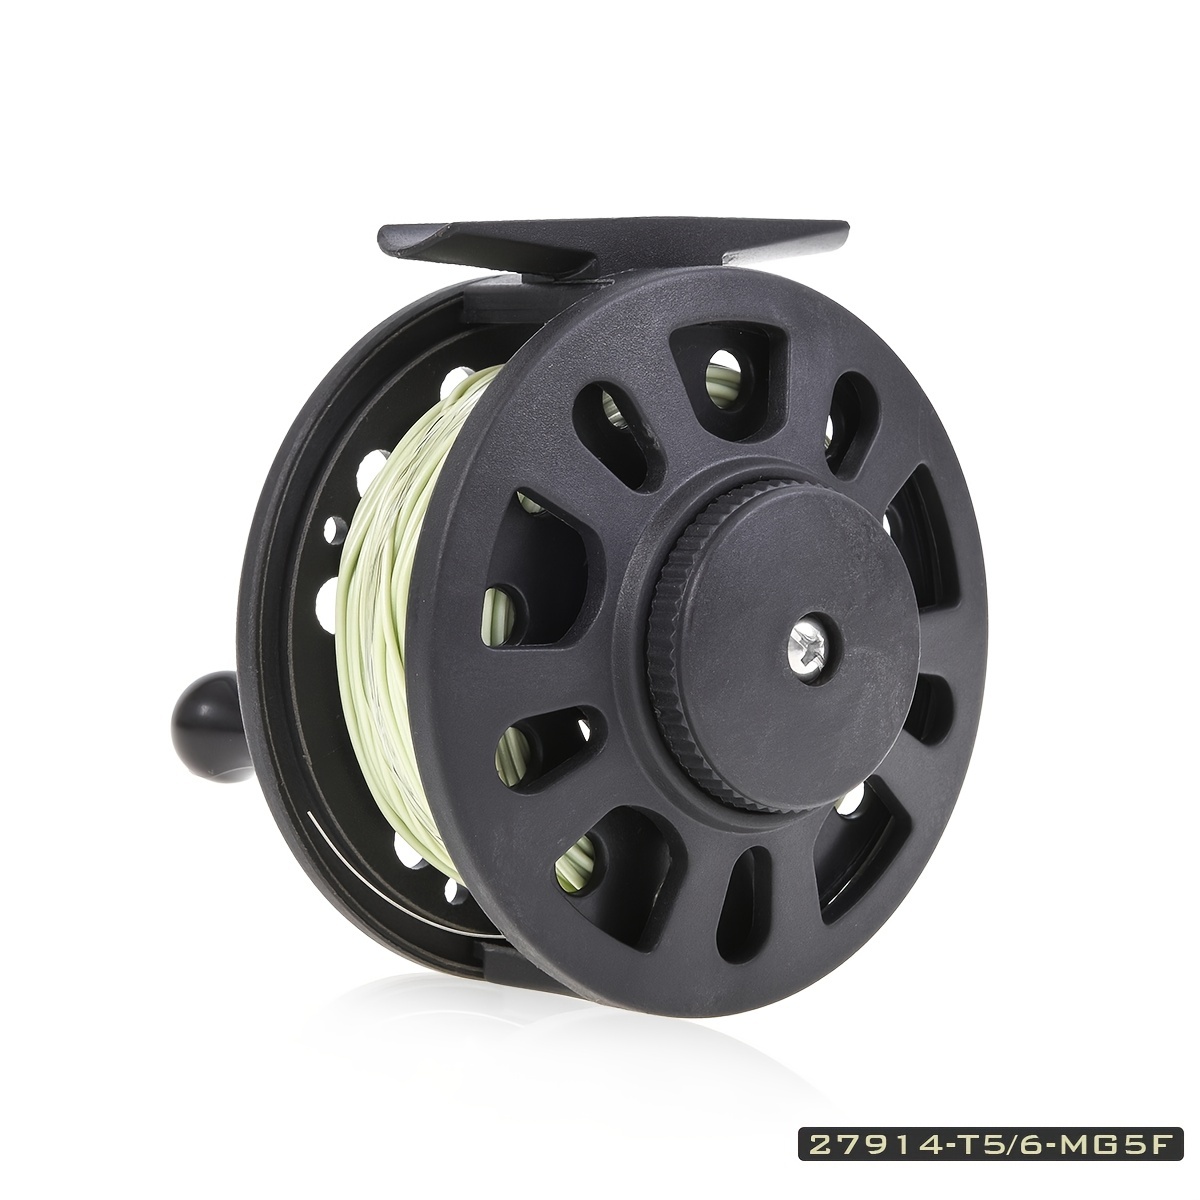 LEOFISHING Preloaded Fly Fishing Reel and Line Combo Set - Ideal for River  and Stream Fishing, Outdoor Fishing Accessories - Includes Weight Forward F